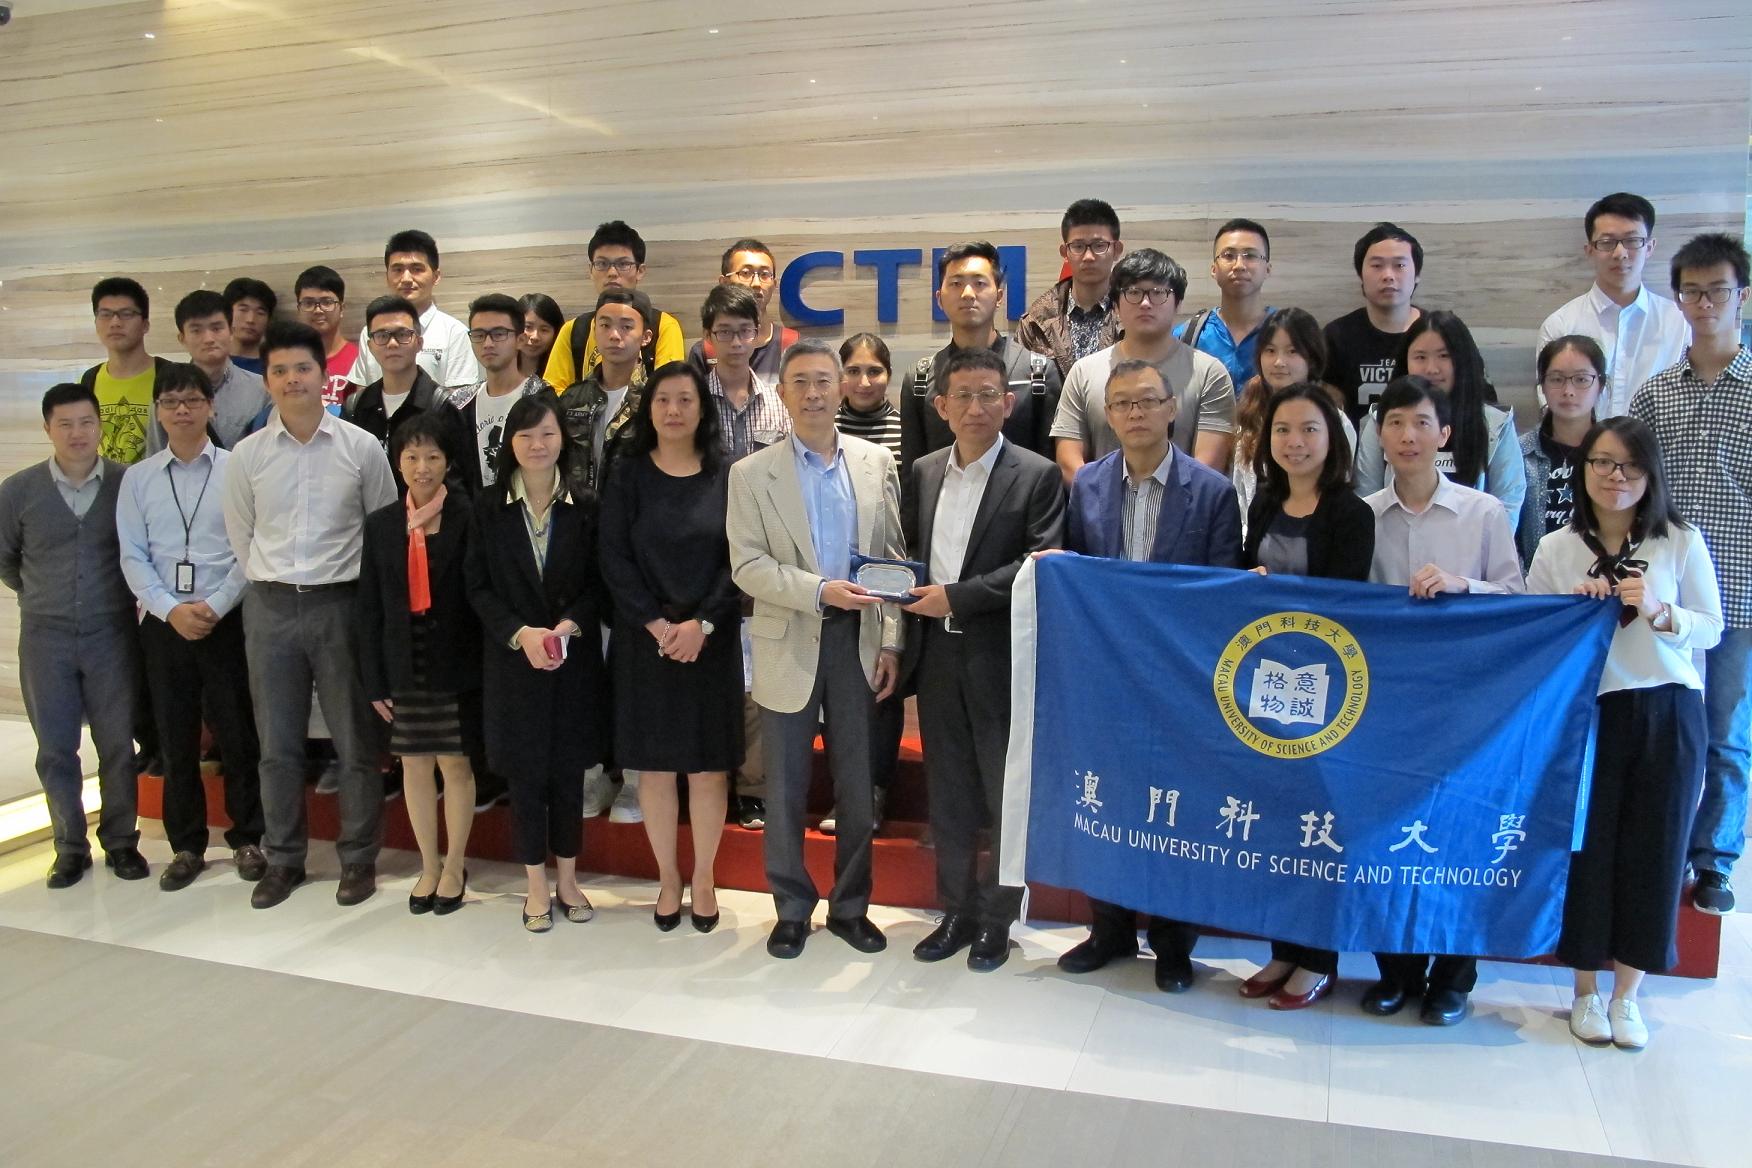 FI Visit to CTM - Group Photo